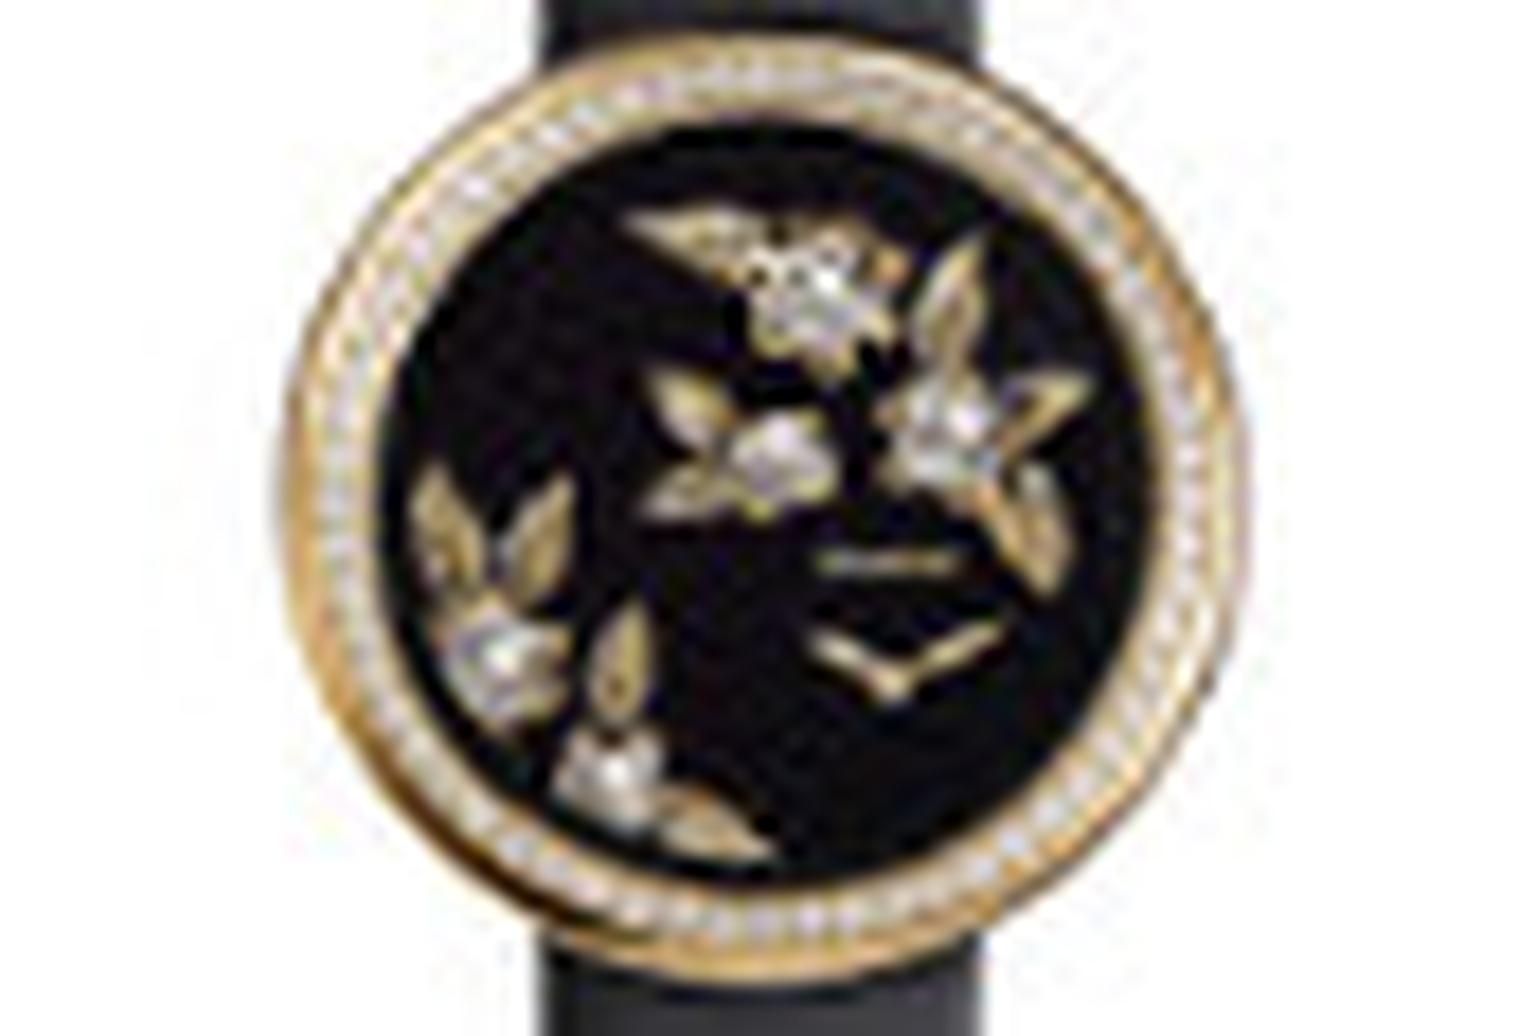 Chanel Mademoiselle Prive watch